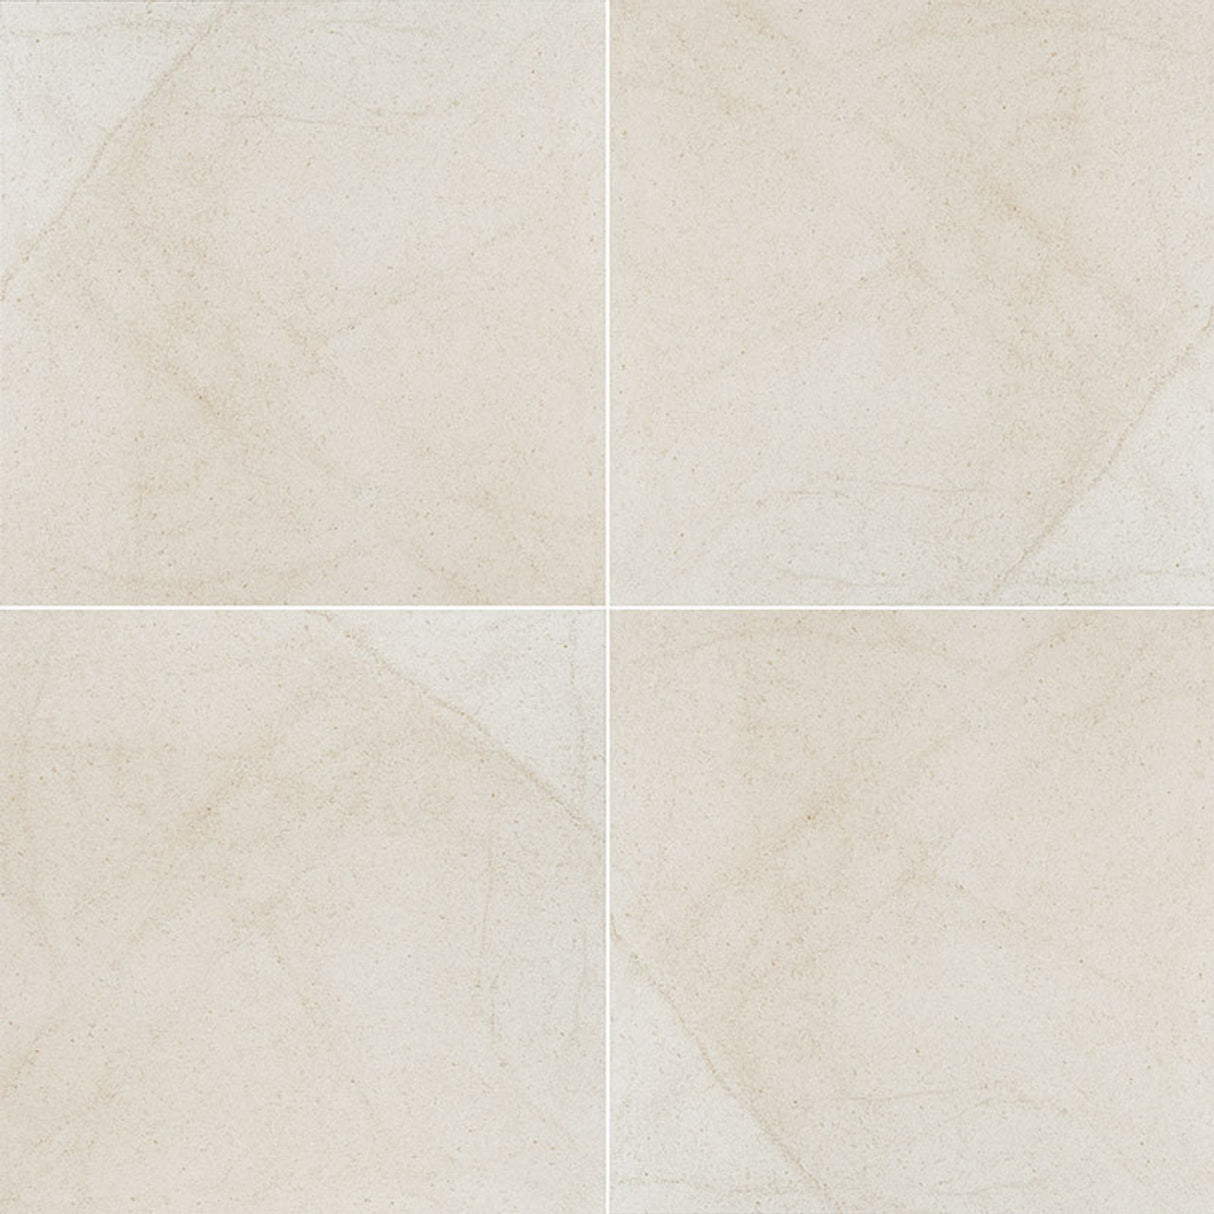 Livingstyle Cream 24"x24" Glazed Porcelain Floor and Wall Tile - MSI Collection LIVINGSTYLE CREAM 24X24 (Case)